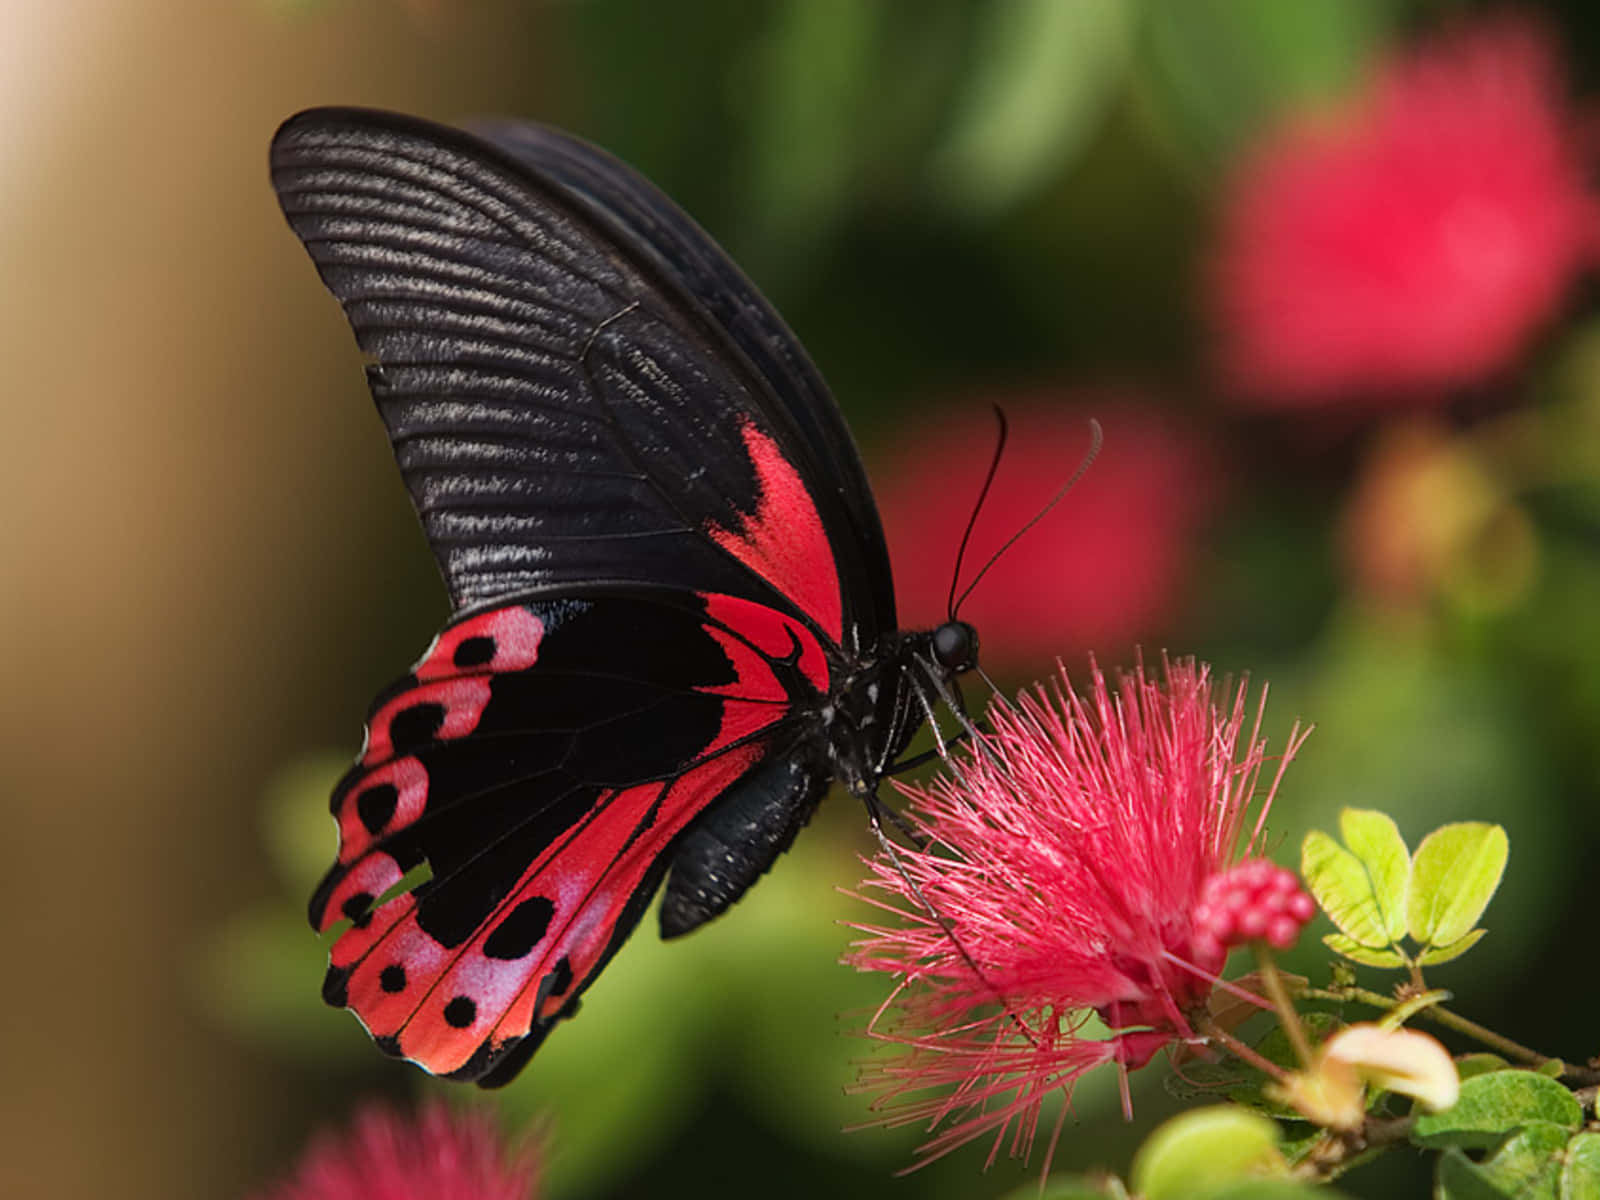 A brilliantly colored butterfly taking flight Wallpaper